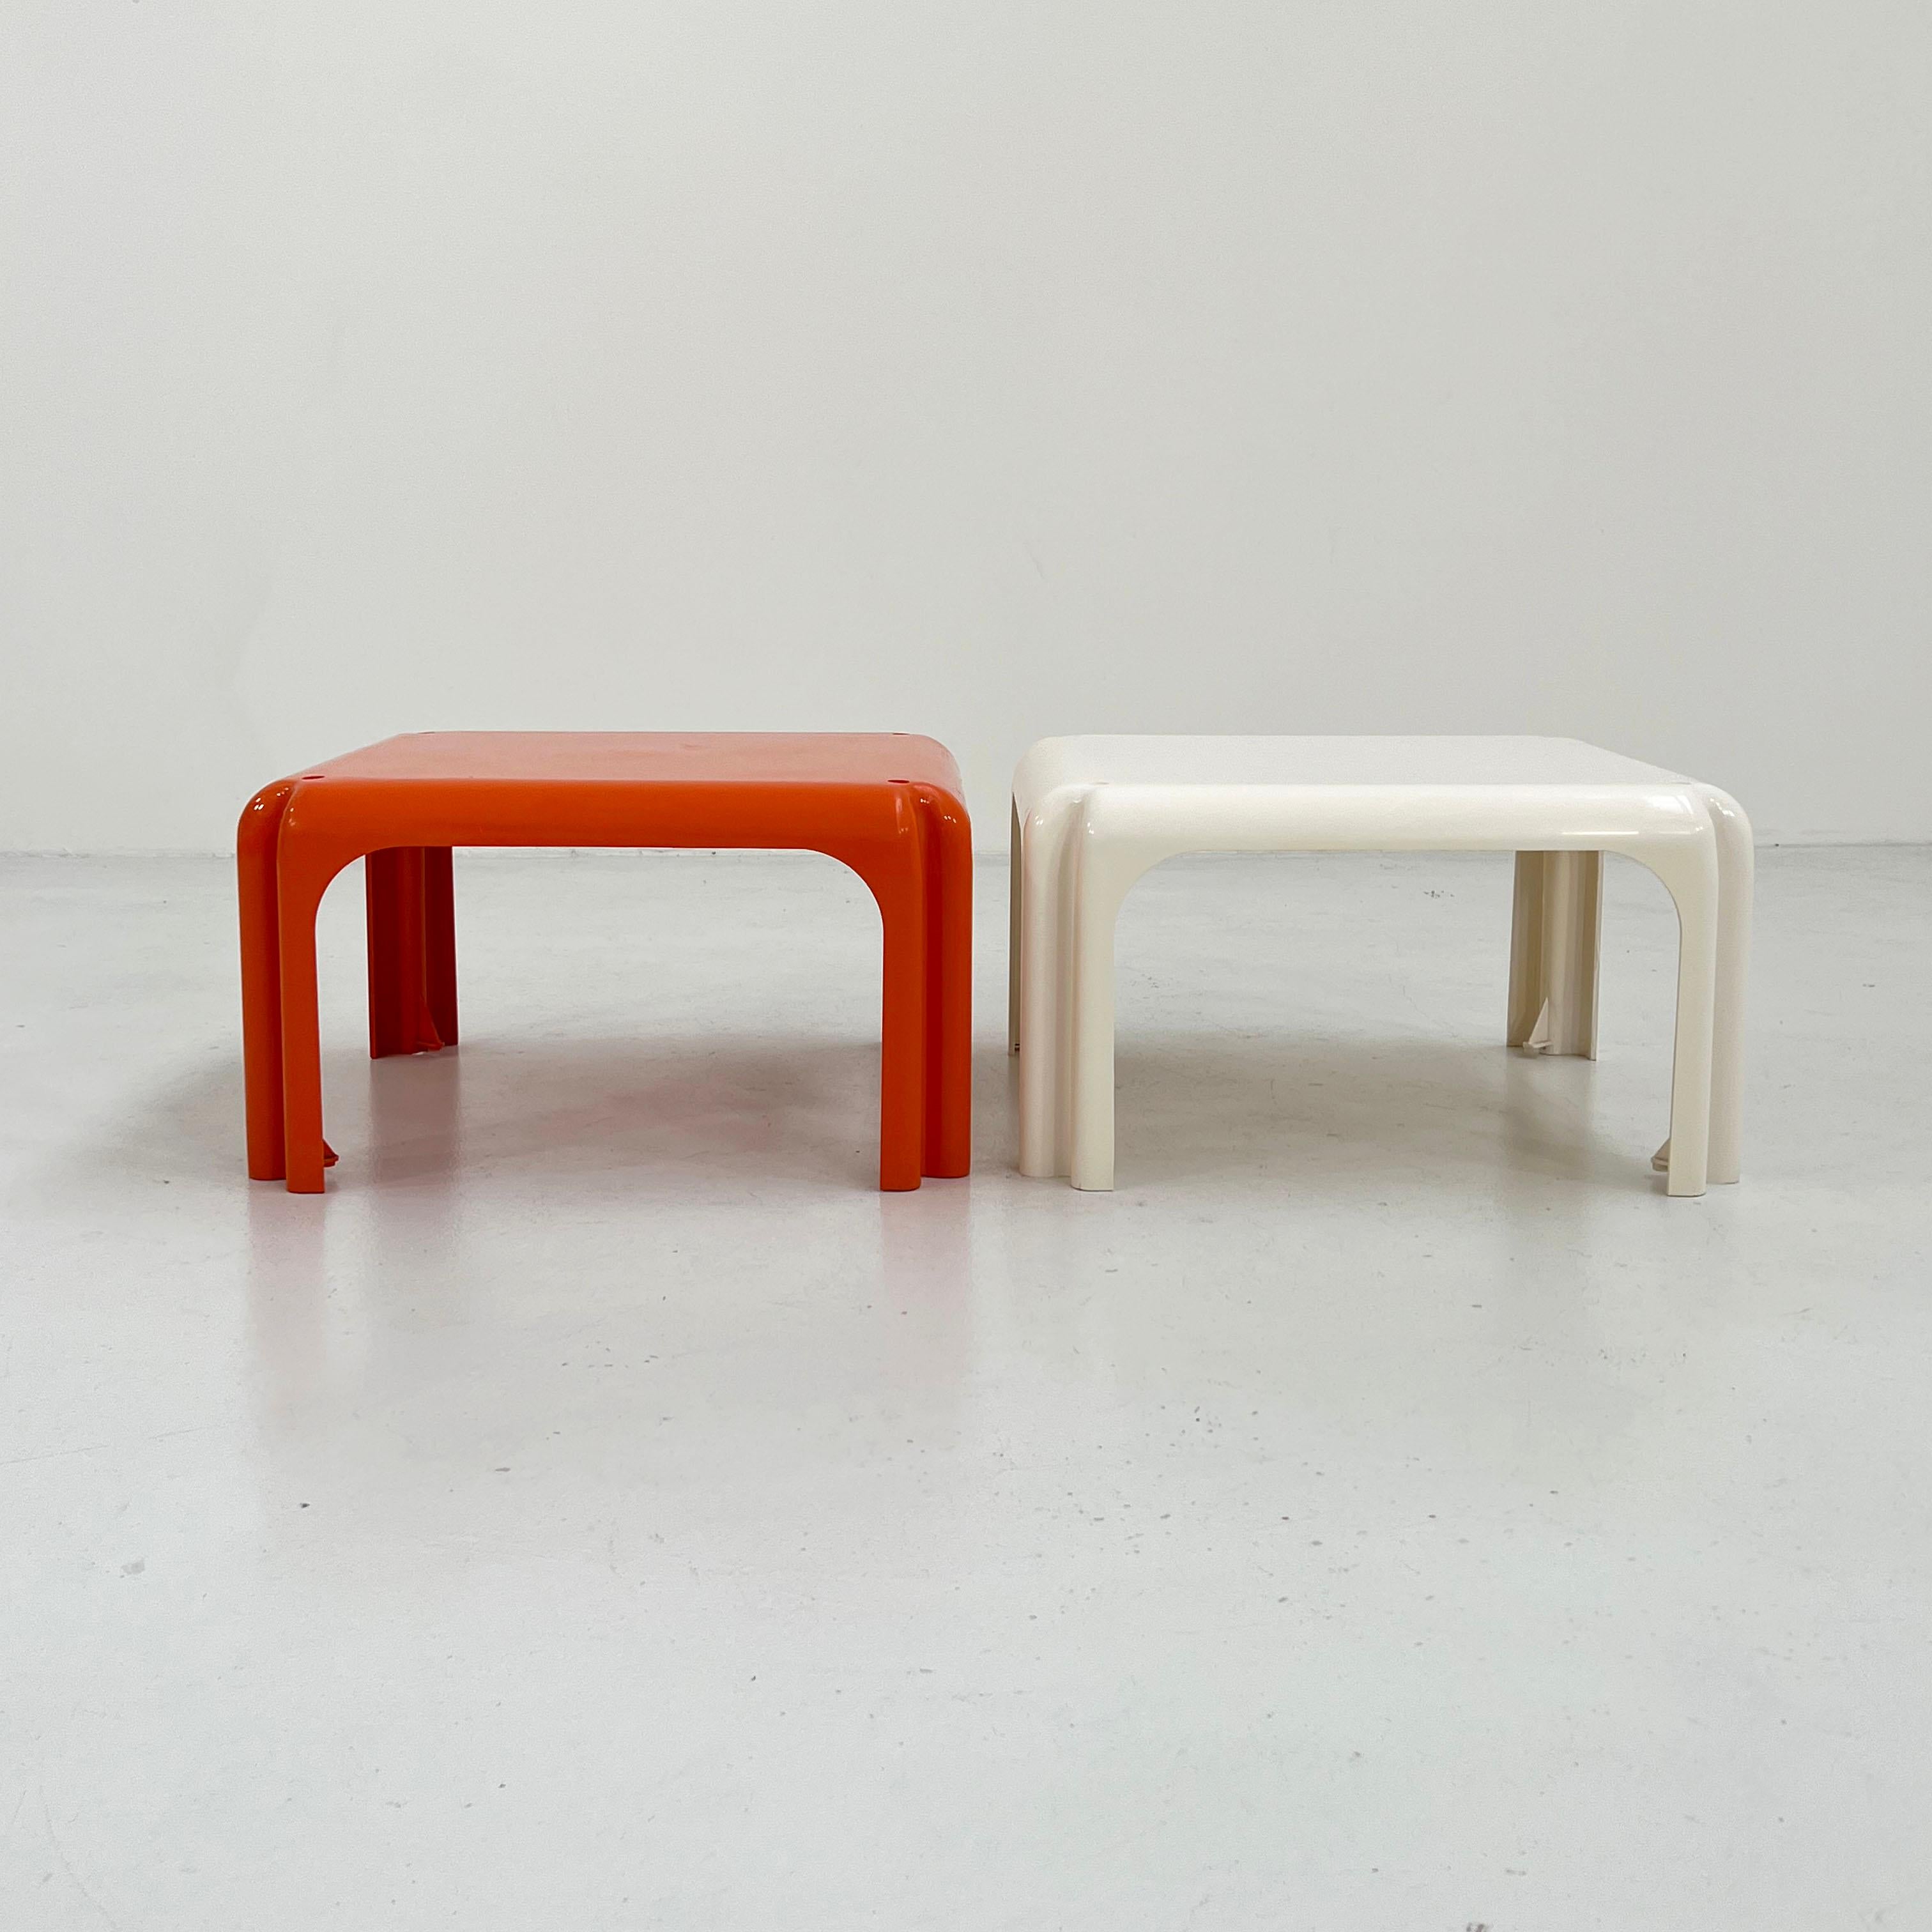 German Pair of Elena Stacking Tables by Vico Magistretti for Metra, 1970s